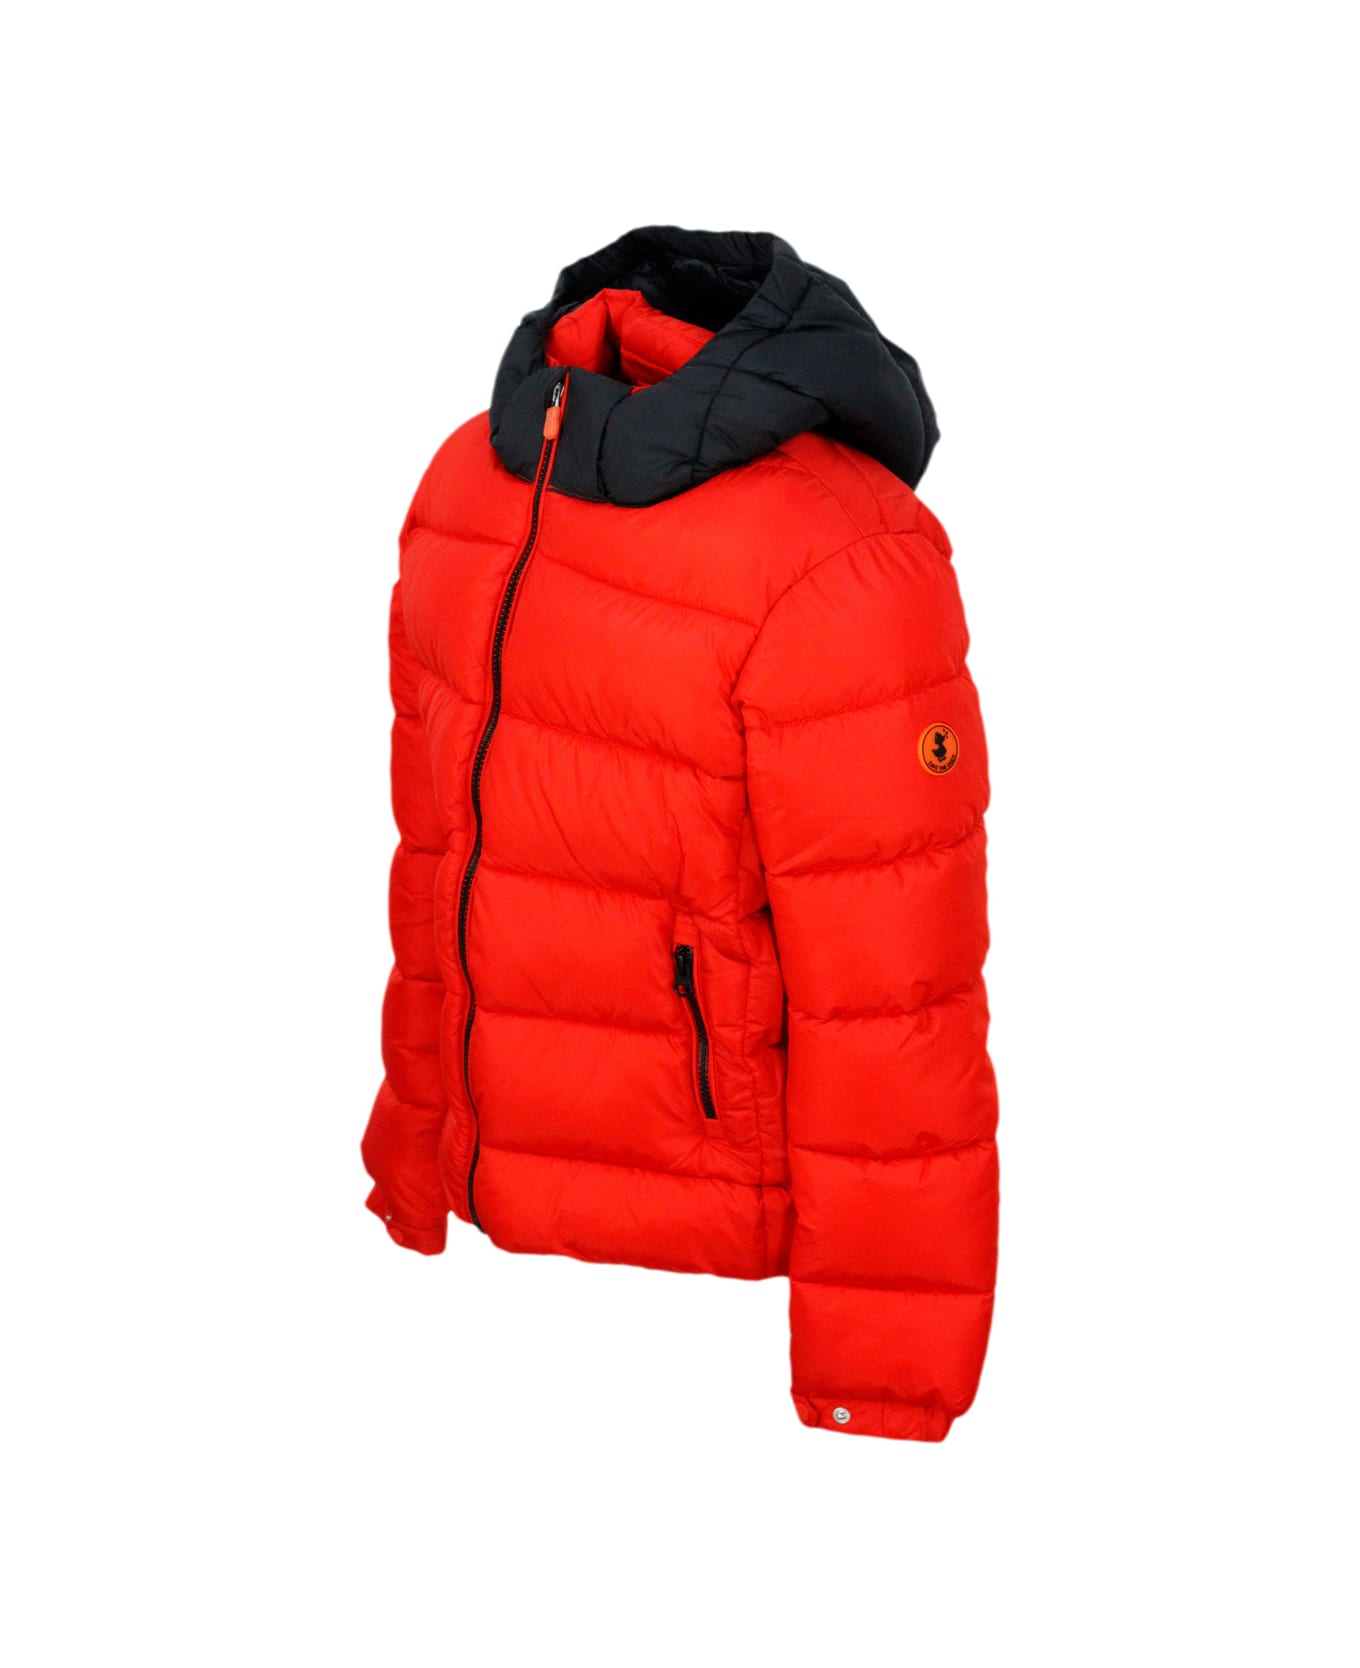 Save the Duck Rumex Down Jacket With Detachable Hood With Animal Free Padding And No Animal Derivatives With Zip Closure And Logo On The Sleeve. Elasticated Edges. - Red